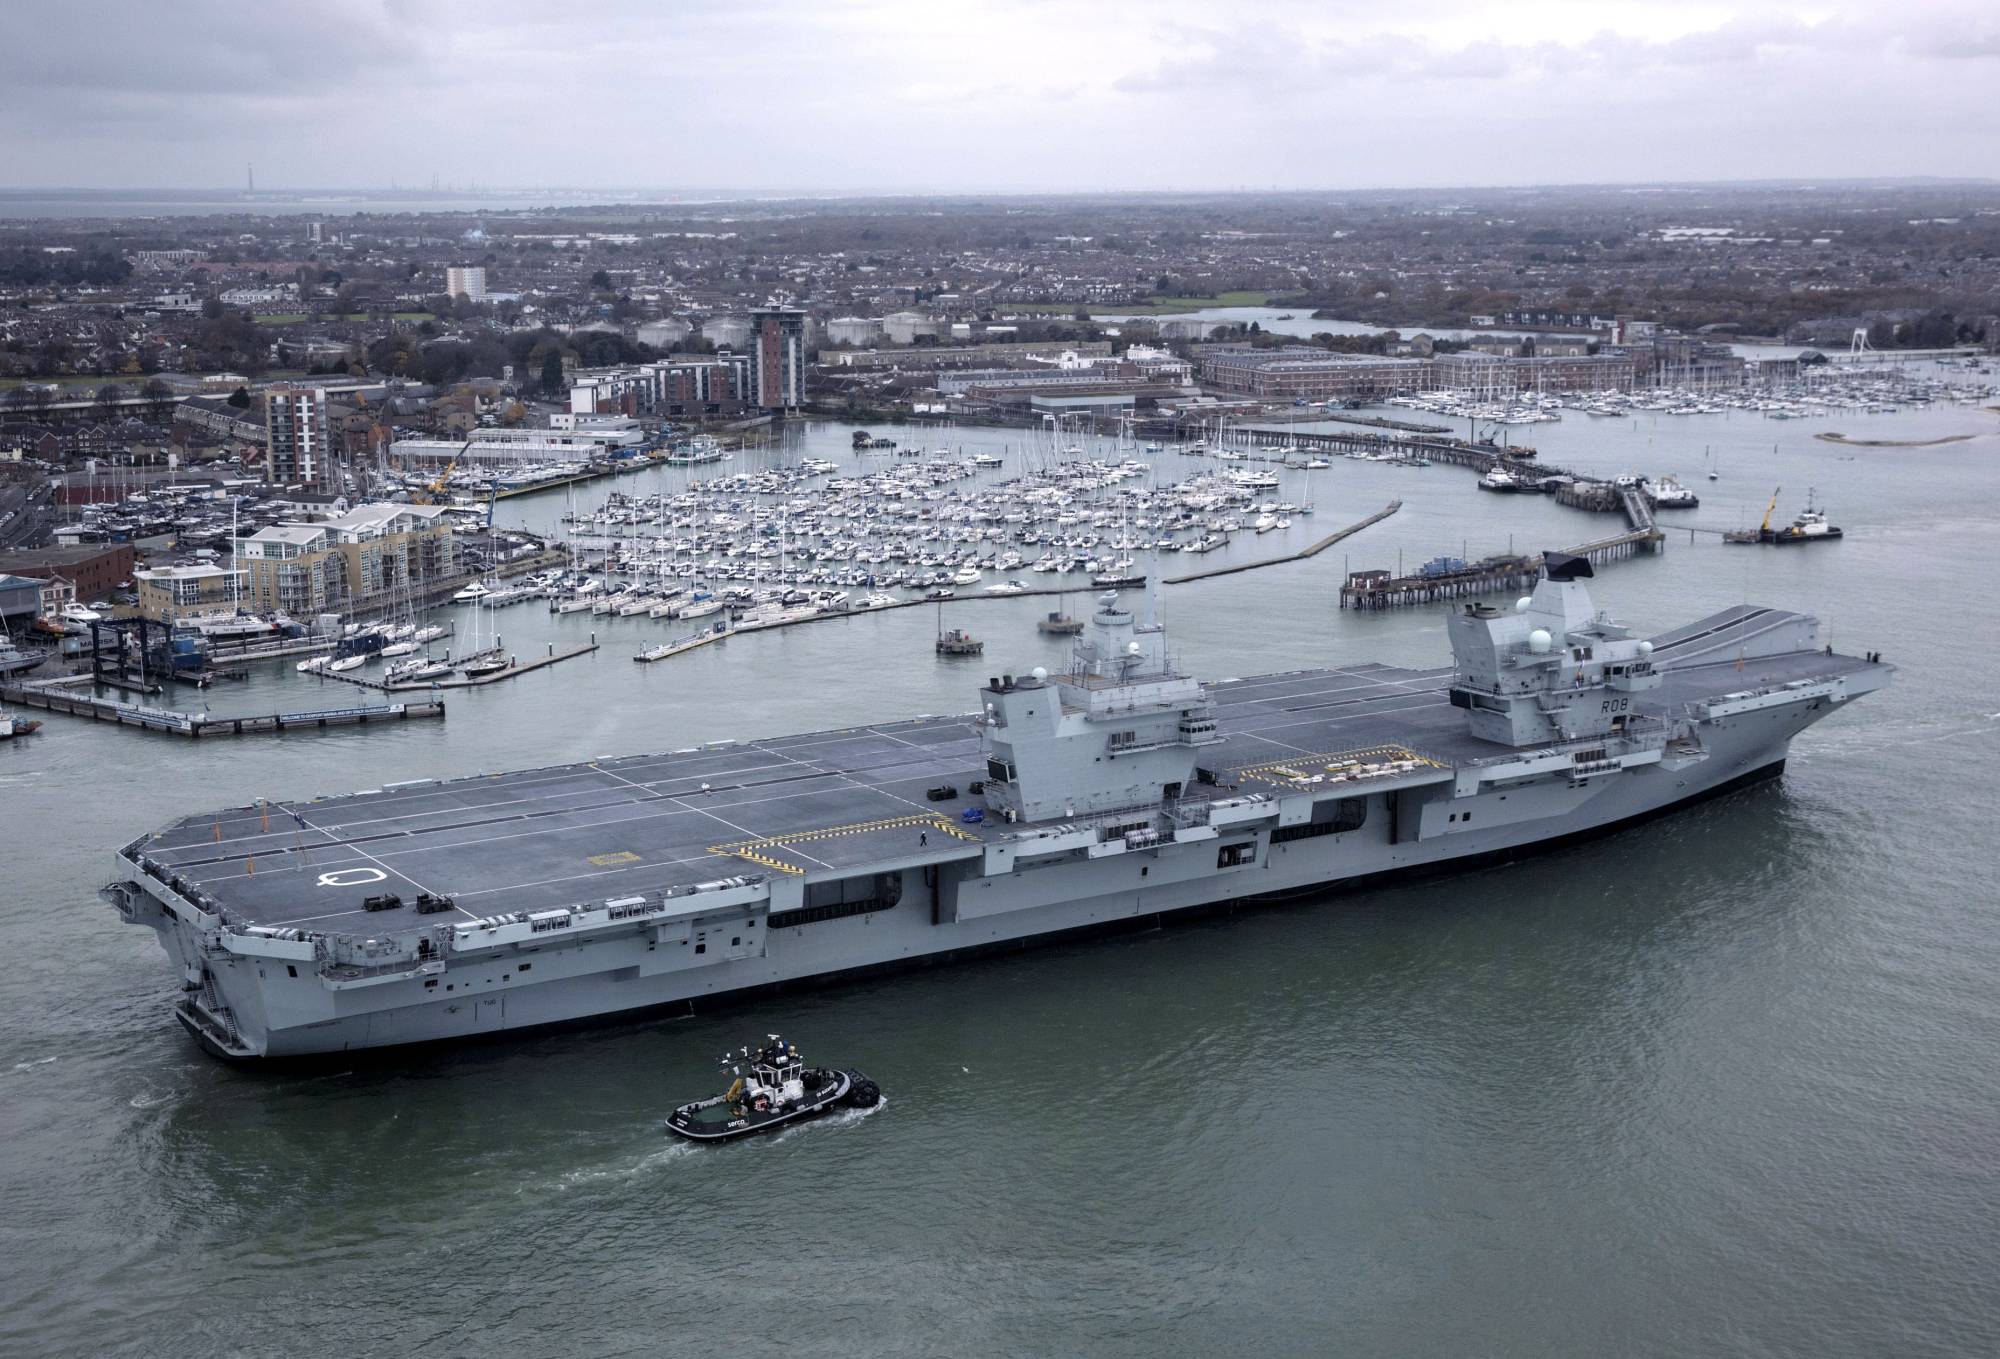 British aircraft carrier HMS Queen Elizabeth in November 2017 in Portsmouth, England | GETTY IMAGES / VIA KYODO